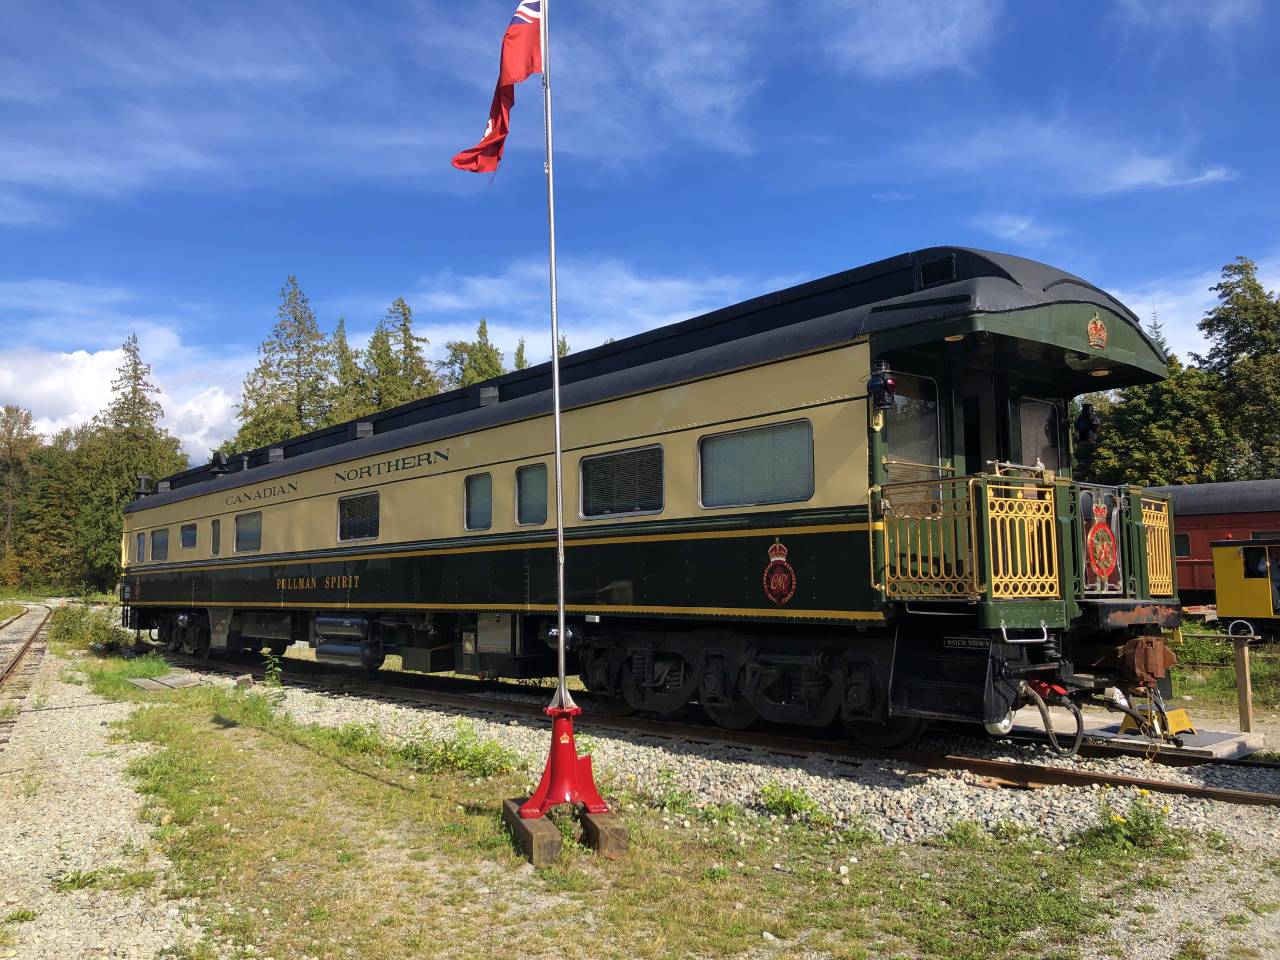 You are currently viewing Pullman Spirit Observation Car